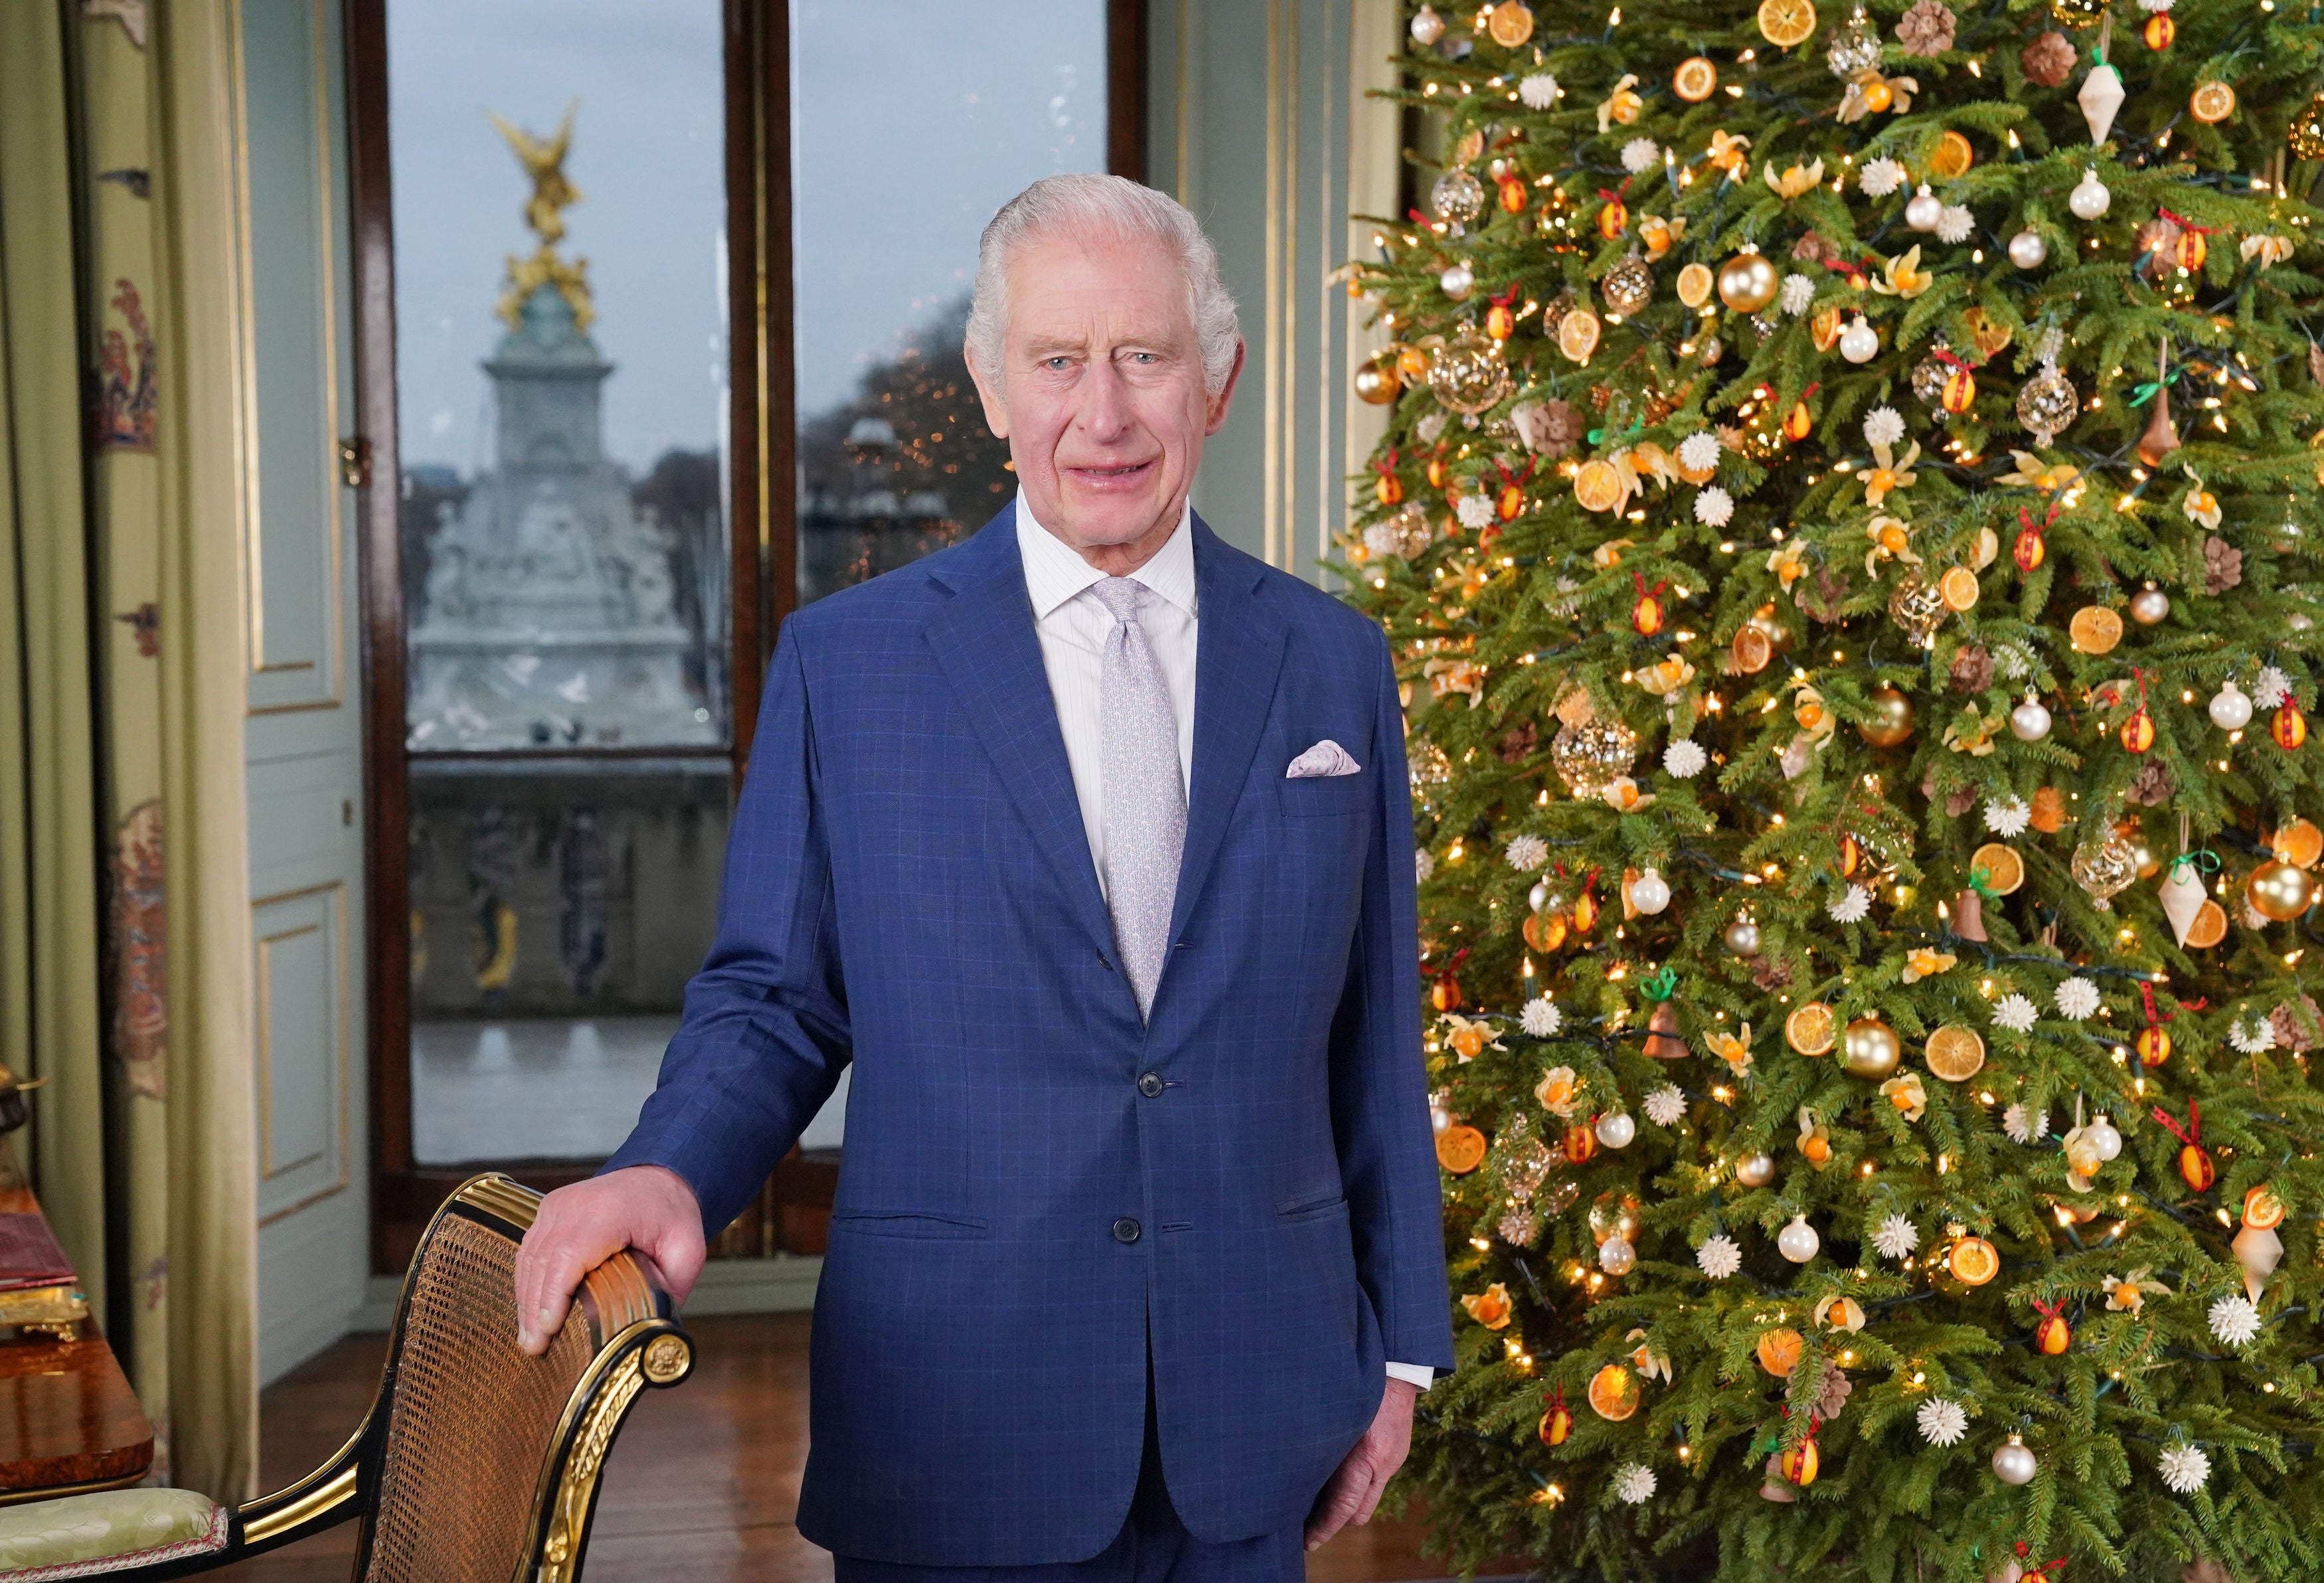 King Charles III during the recording of his Christmas message at Buckingham Palace this year